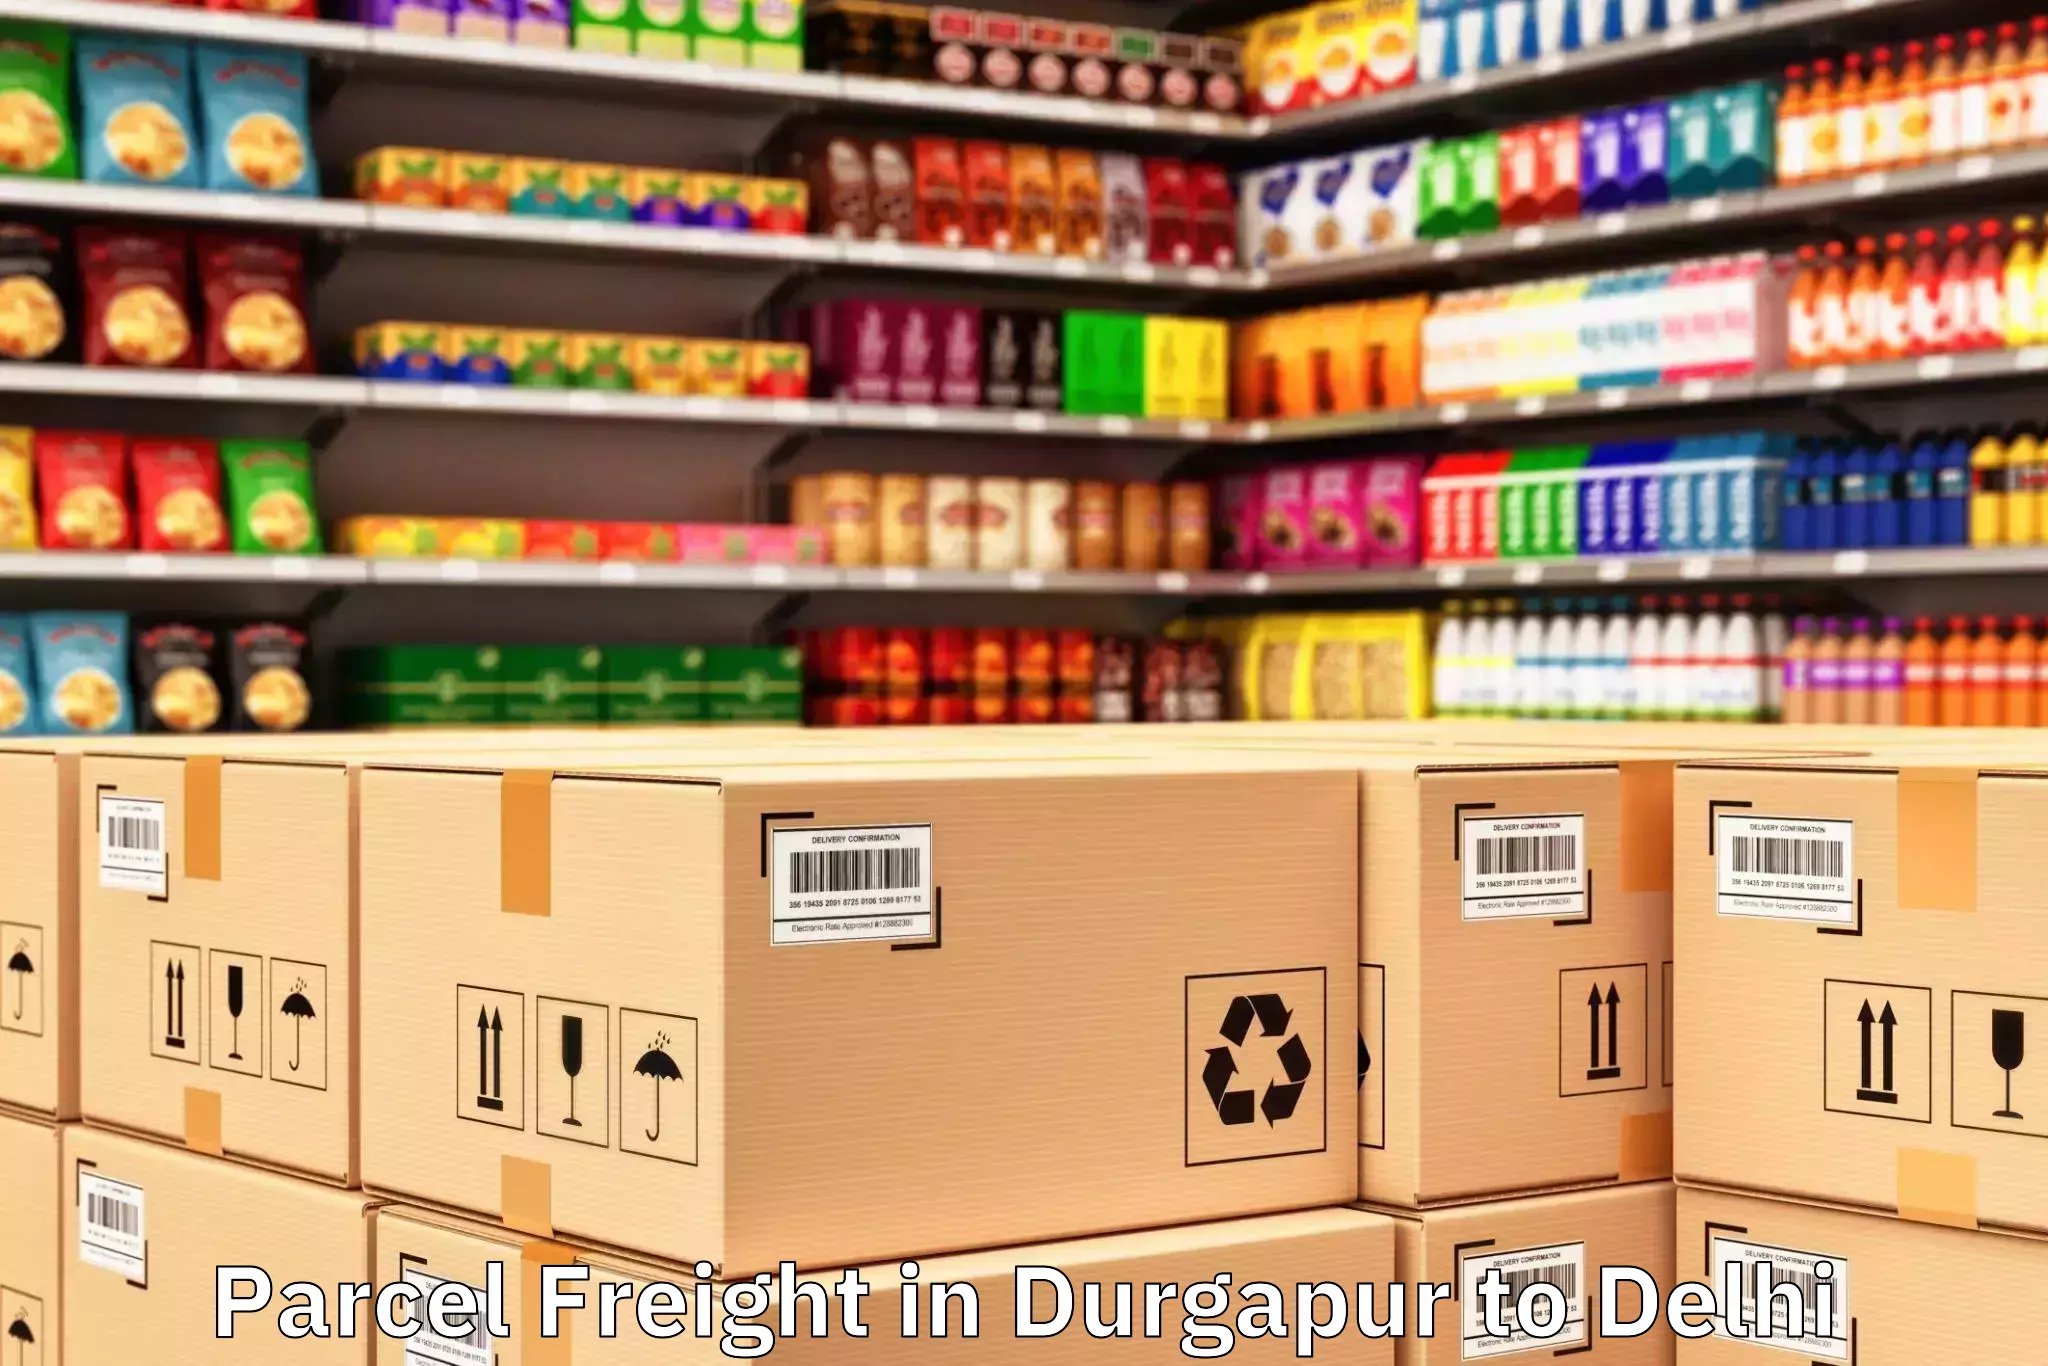 Top Durgapur to Unity One Janakpuri Mall Parcel Freight Available